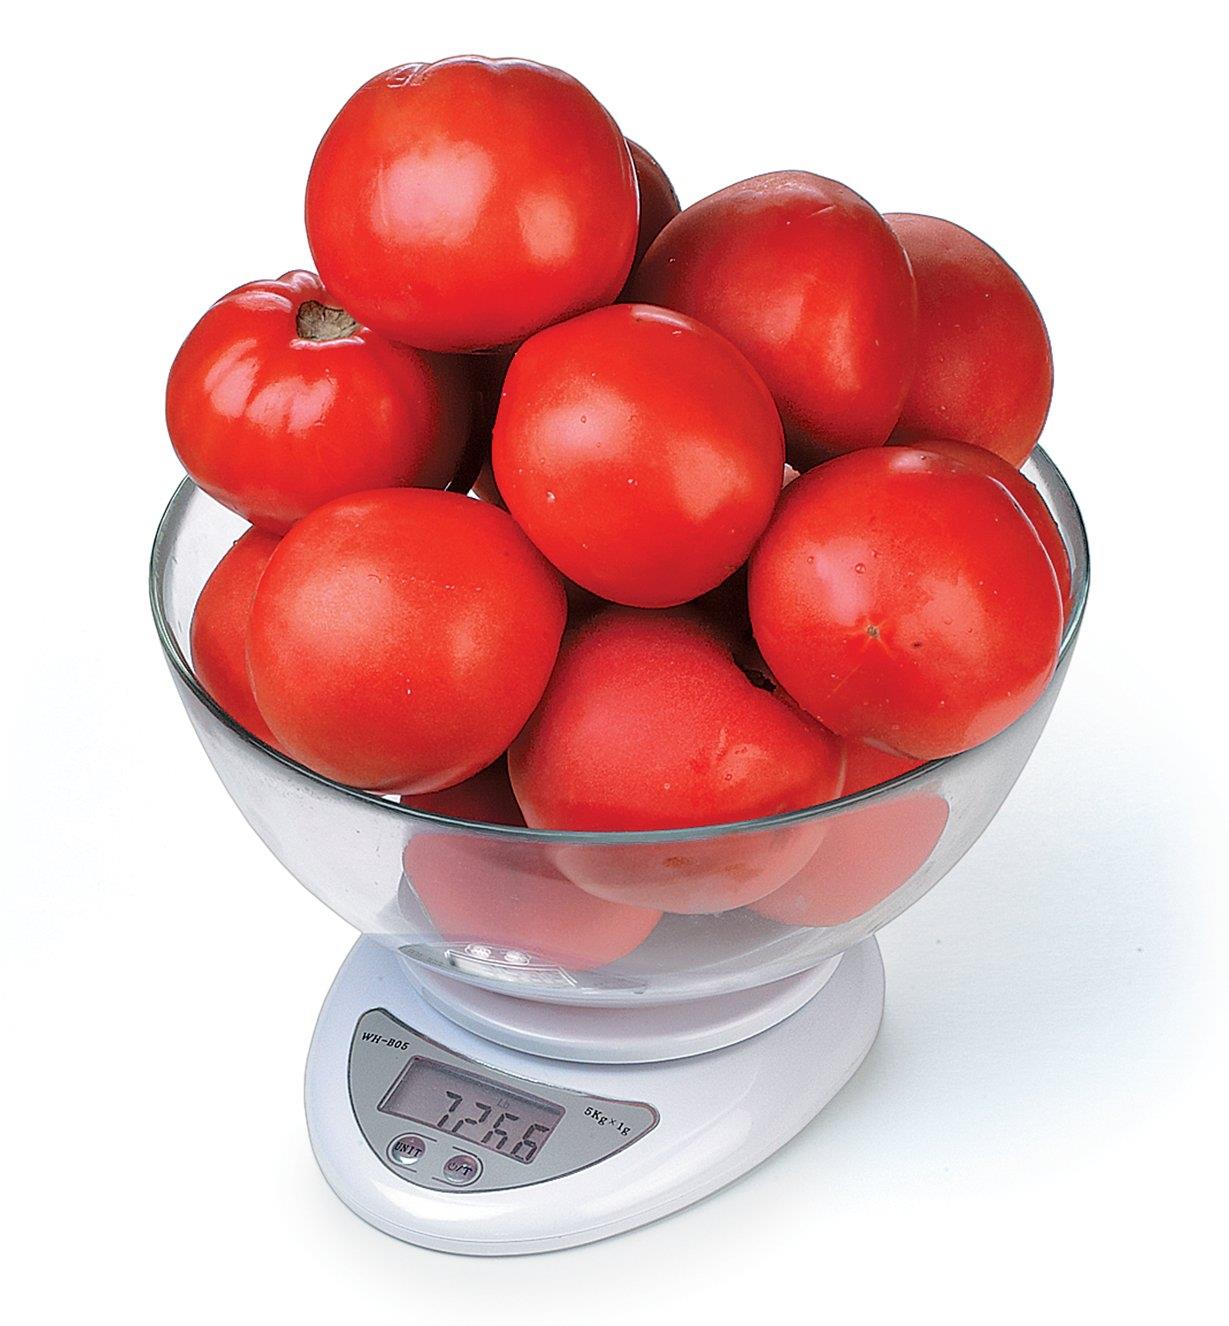 Mini Digital Kitchen Scale weighing a bowl of tomatoes